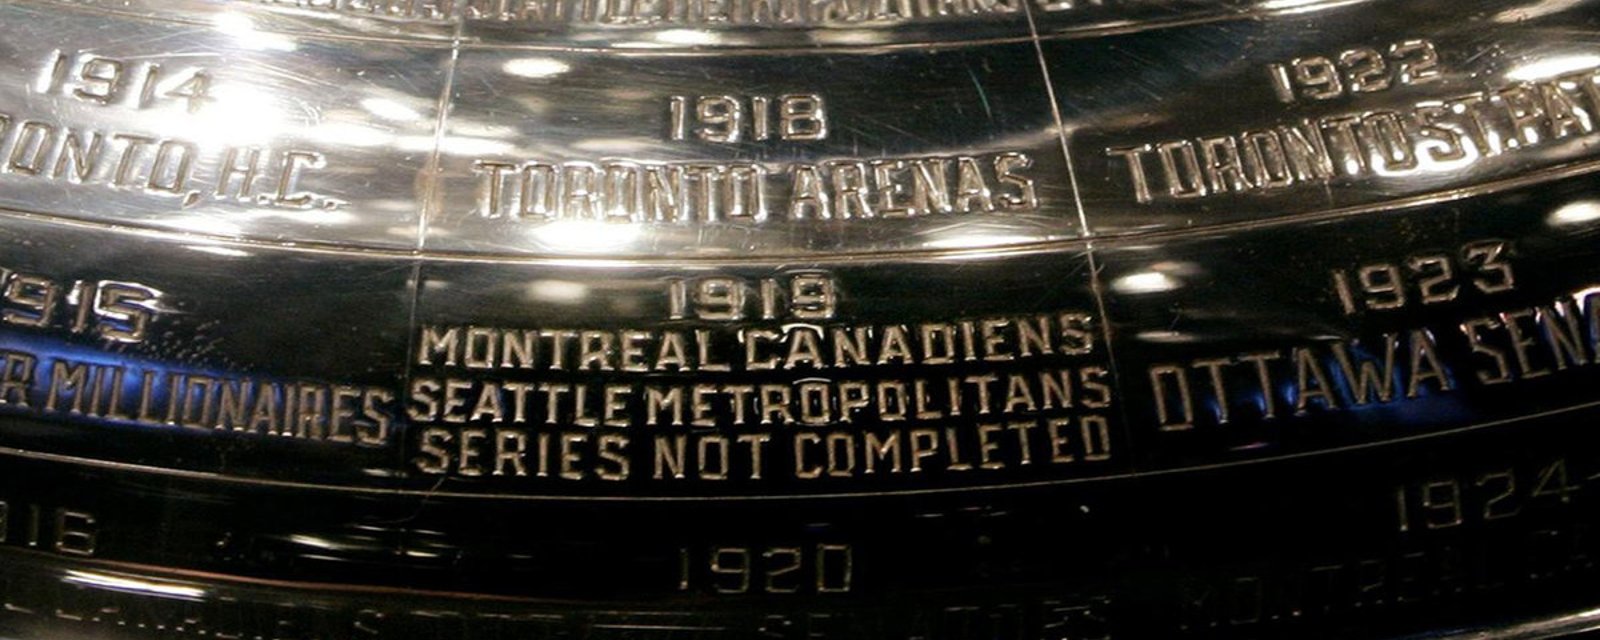 Did you know? The Stanley Cup wasn't awarded in 1919. 